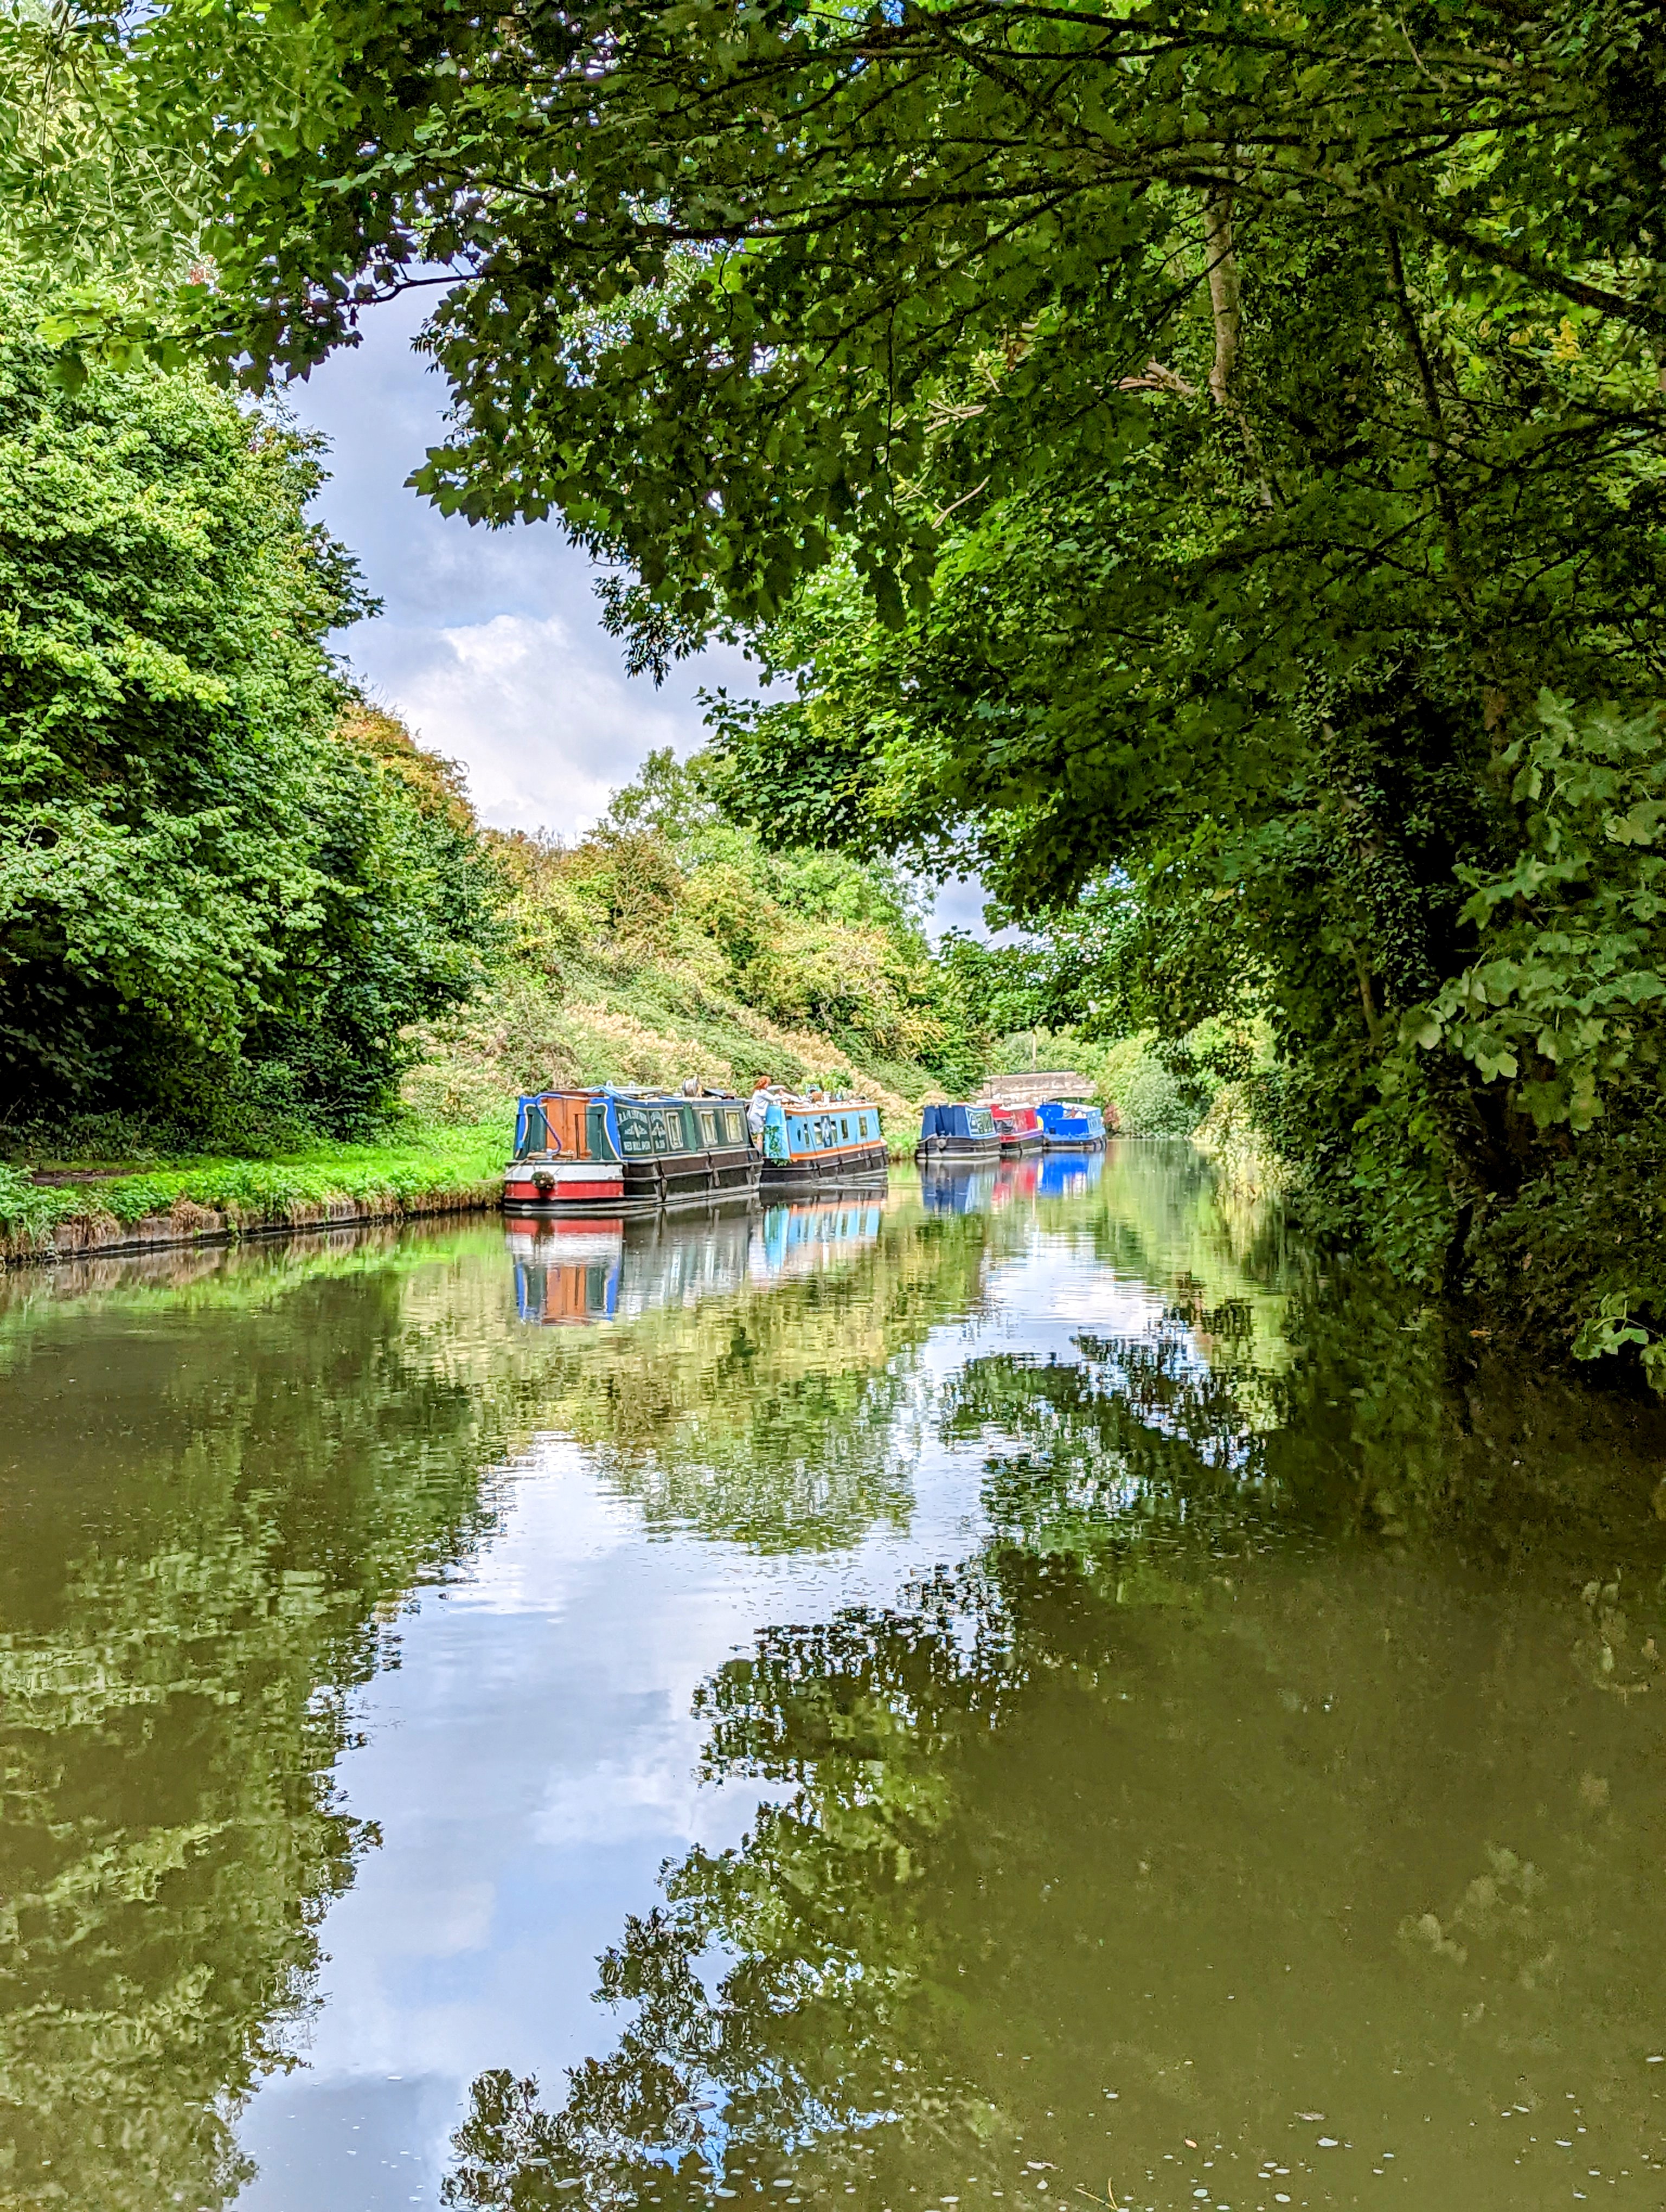 Narrowboats moored on the canal